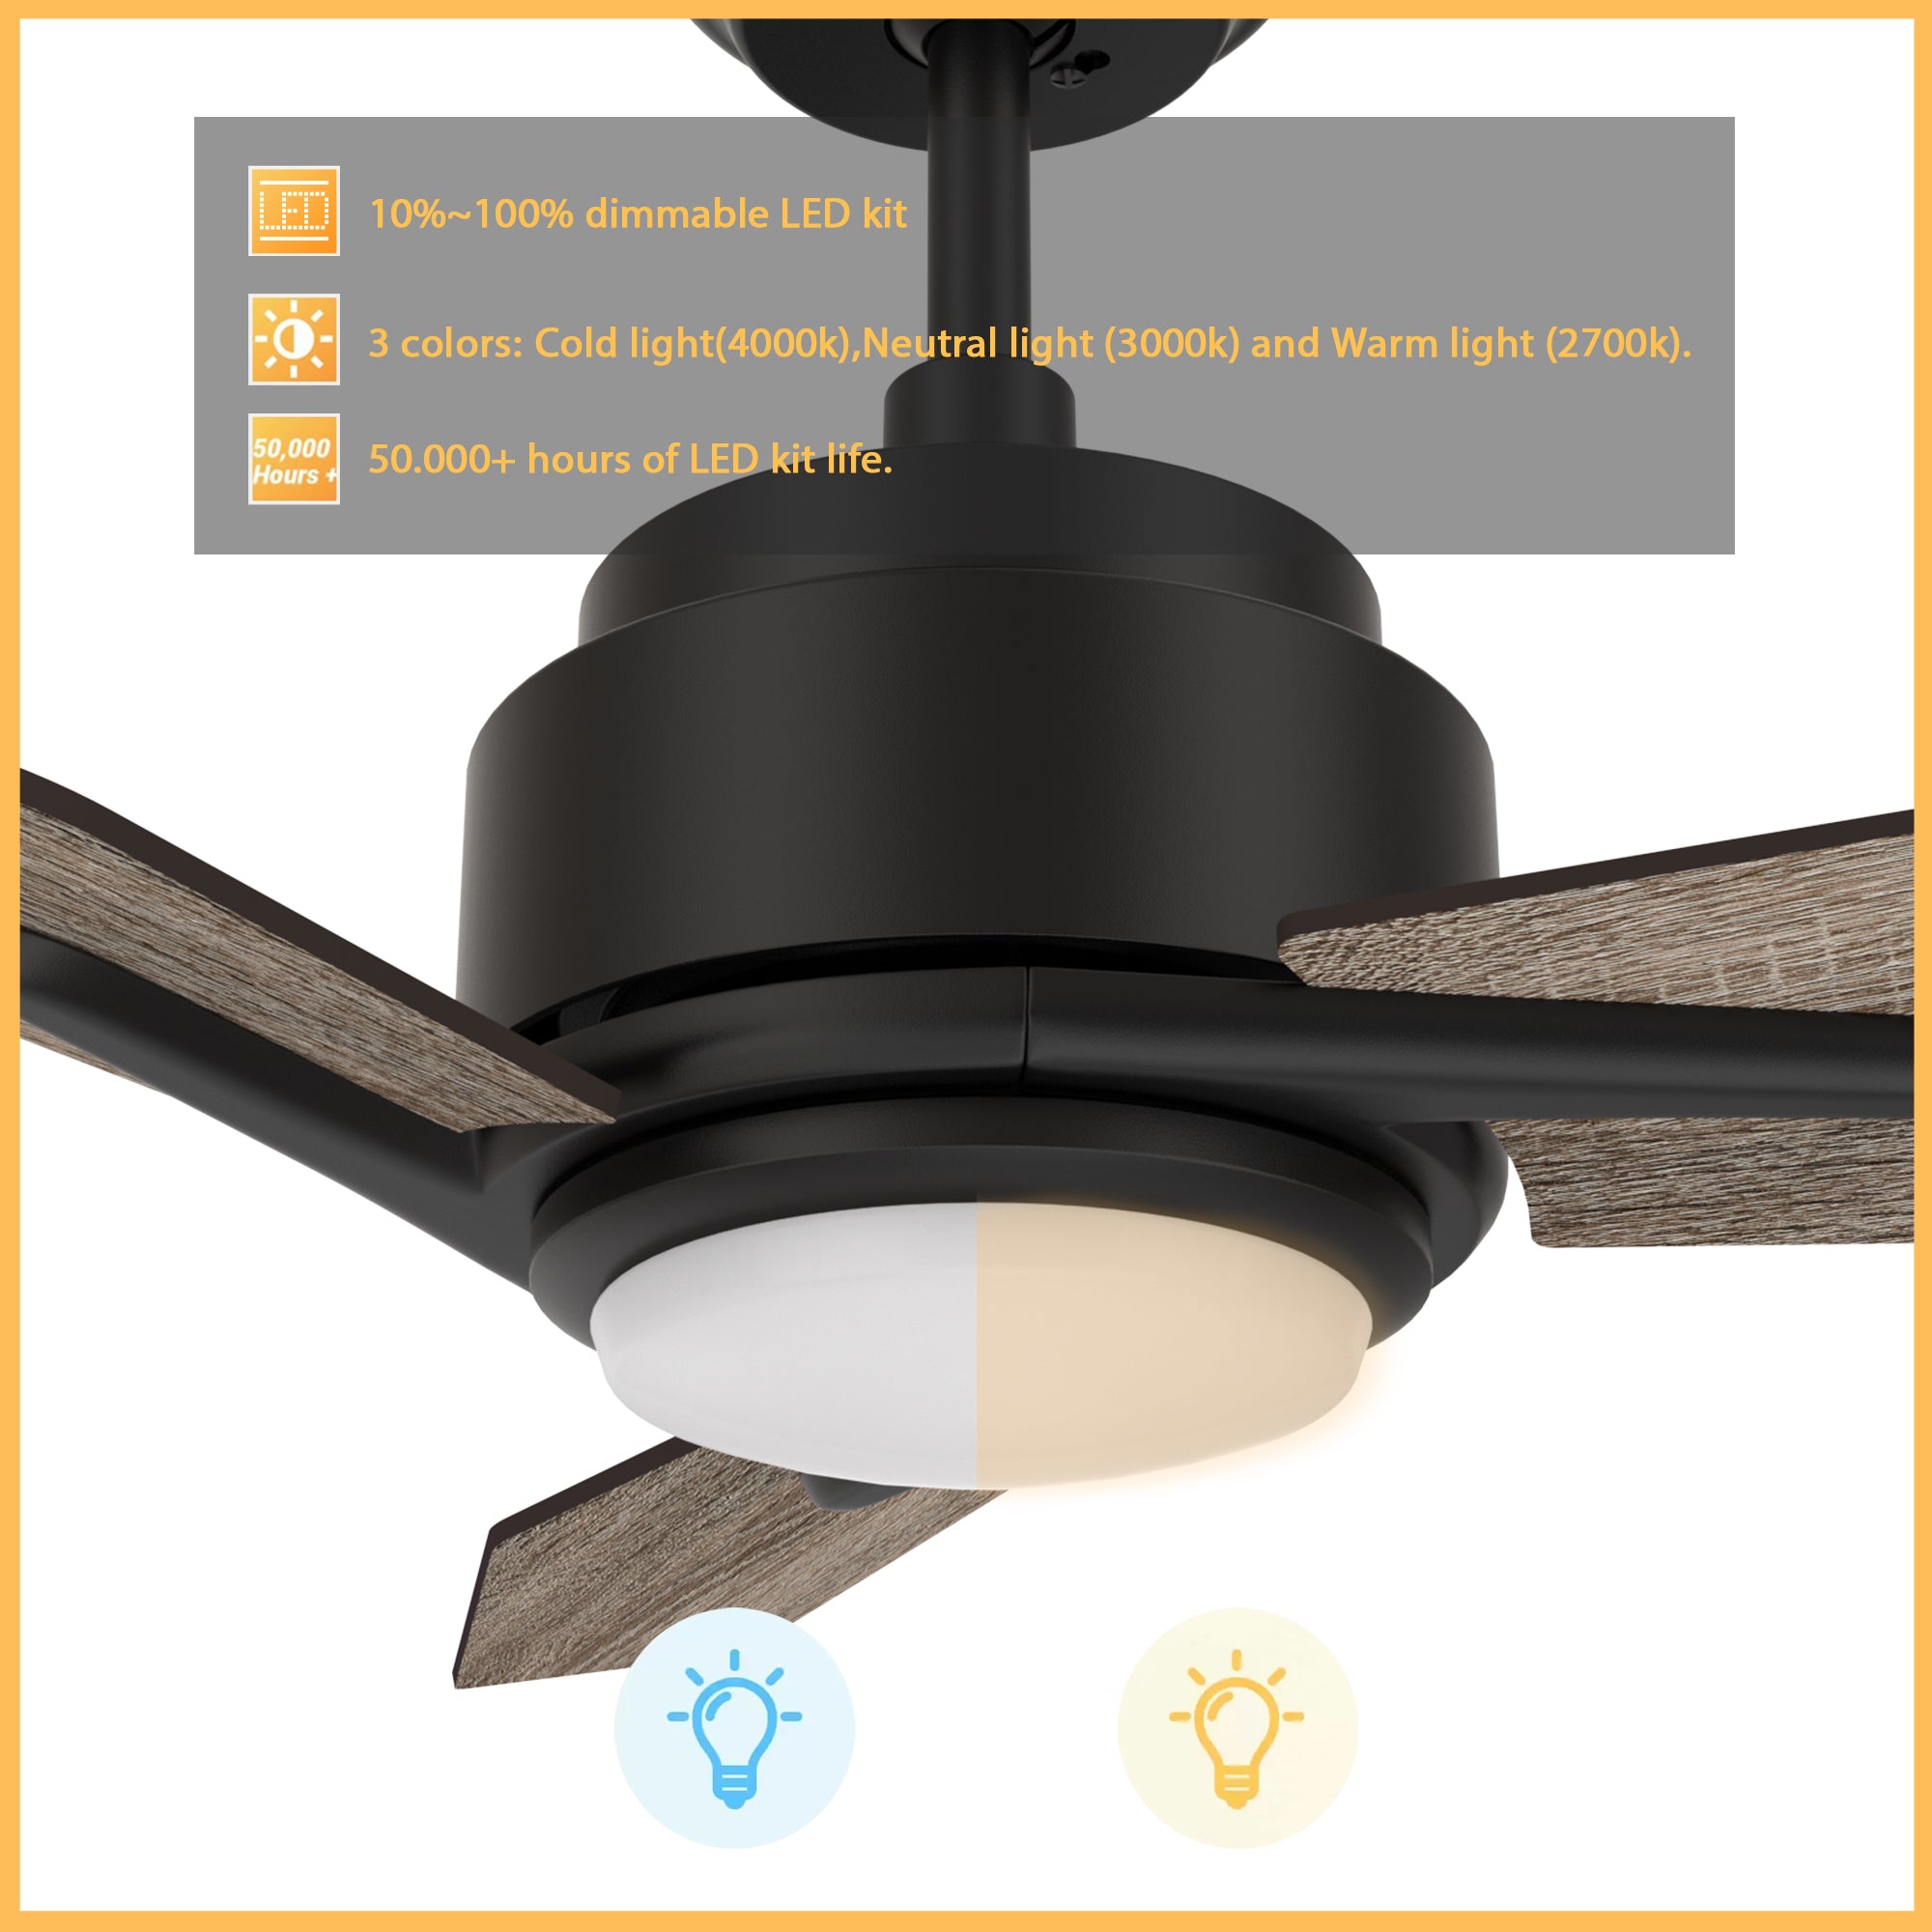 This Smafan Tilbury 52&#39;&#39; smart ceiling fan features Remote control, Wi-Fi apps, Siri Shortcut and Voice control technology (compatible with Amazon Alexa and Google Home Assistant ) to set fan preferences.